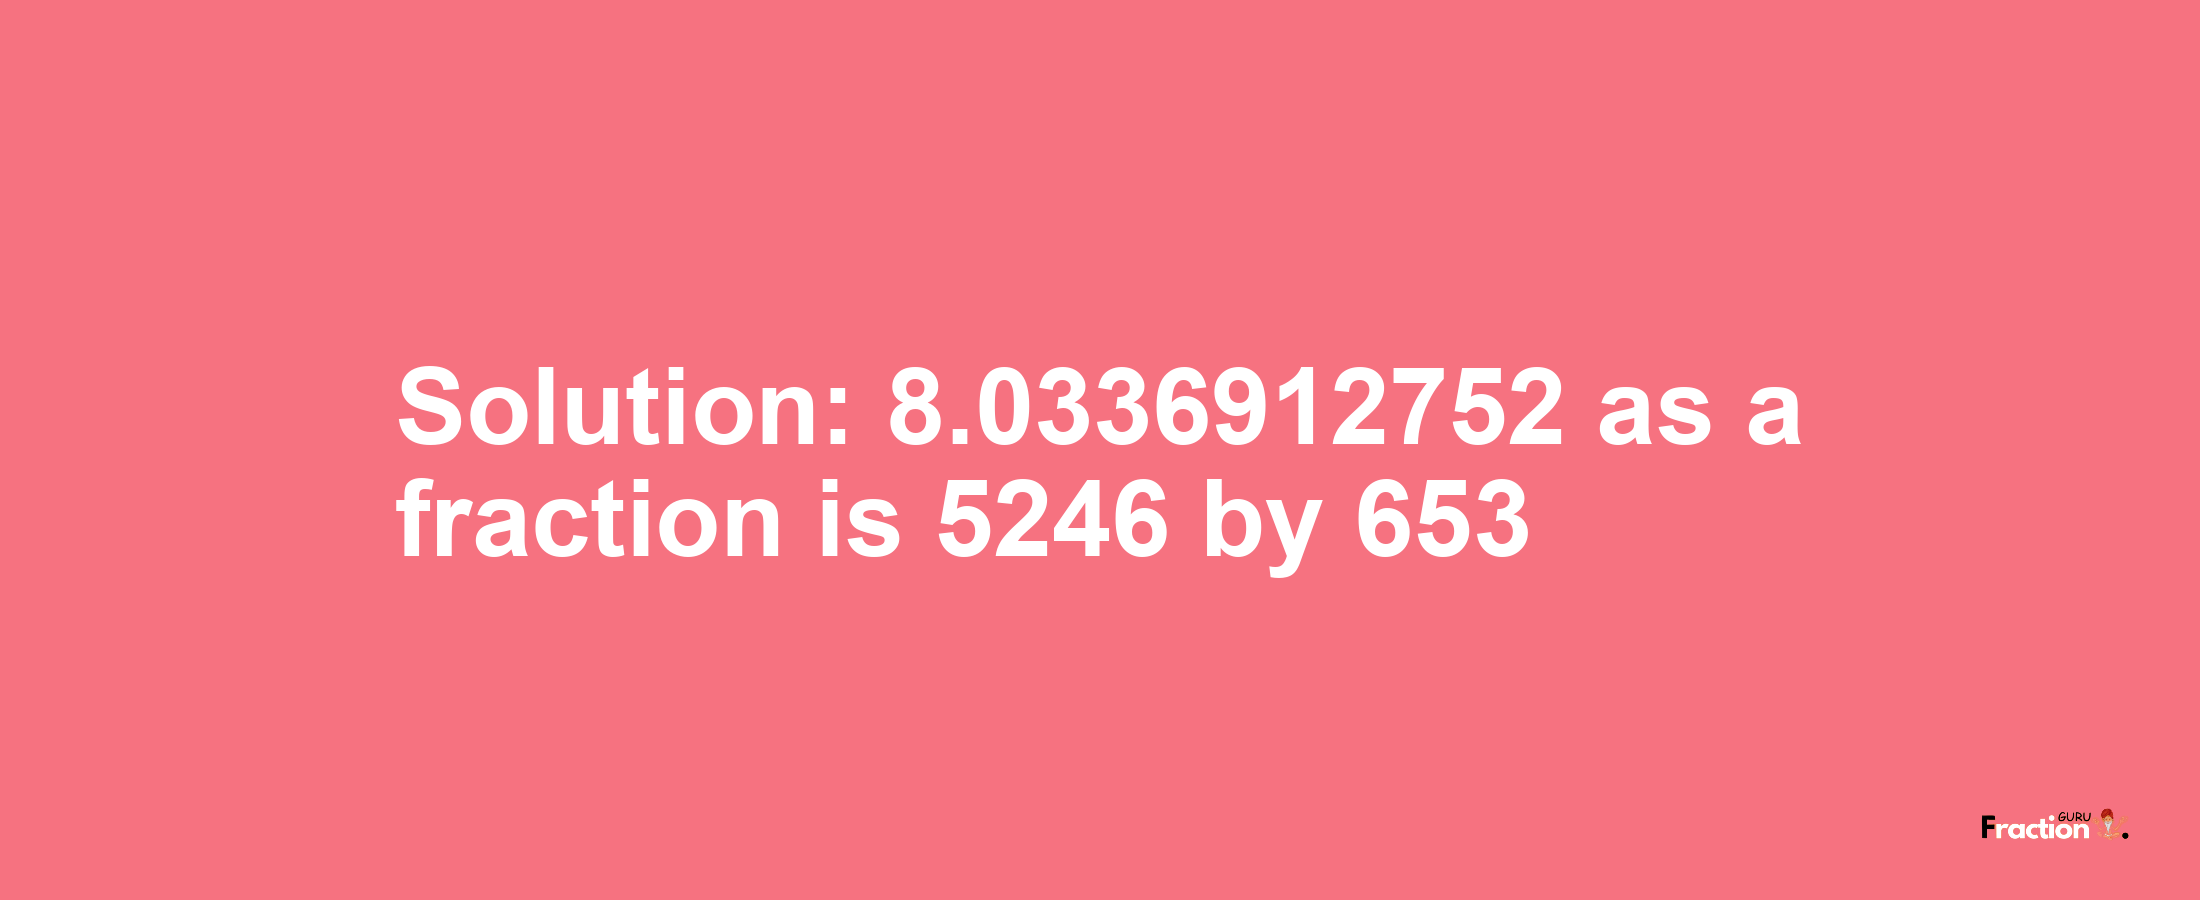 Solution:8.0336912752 as a fraction is 5246/653